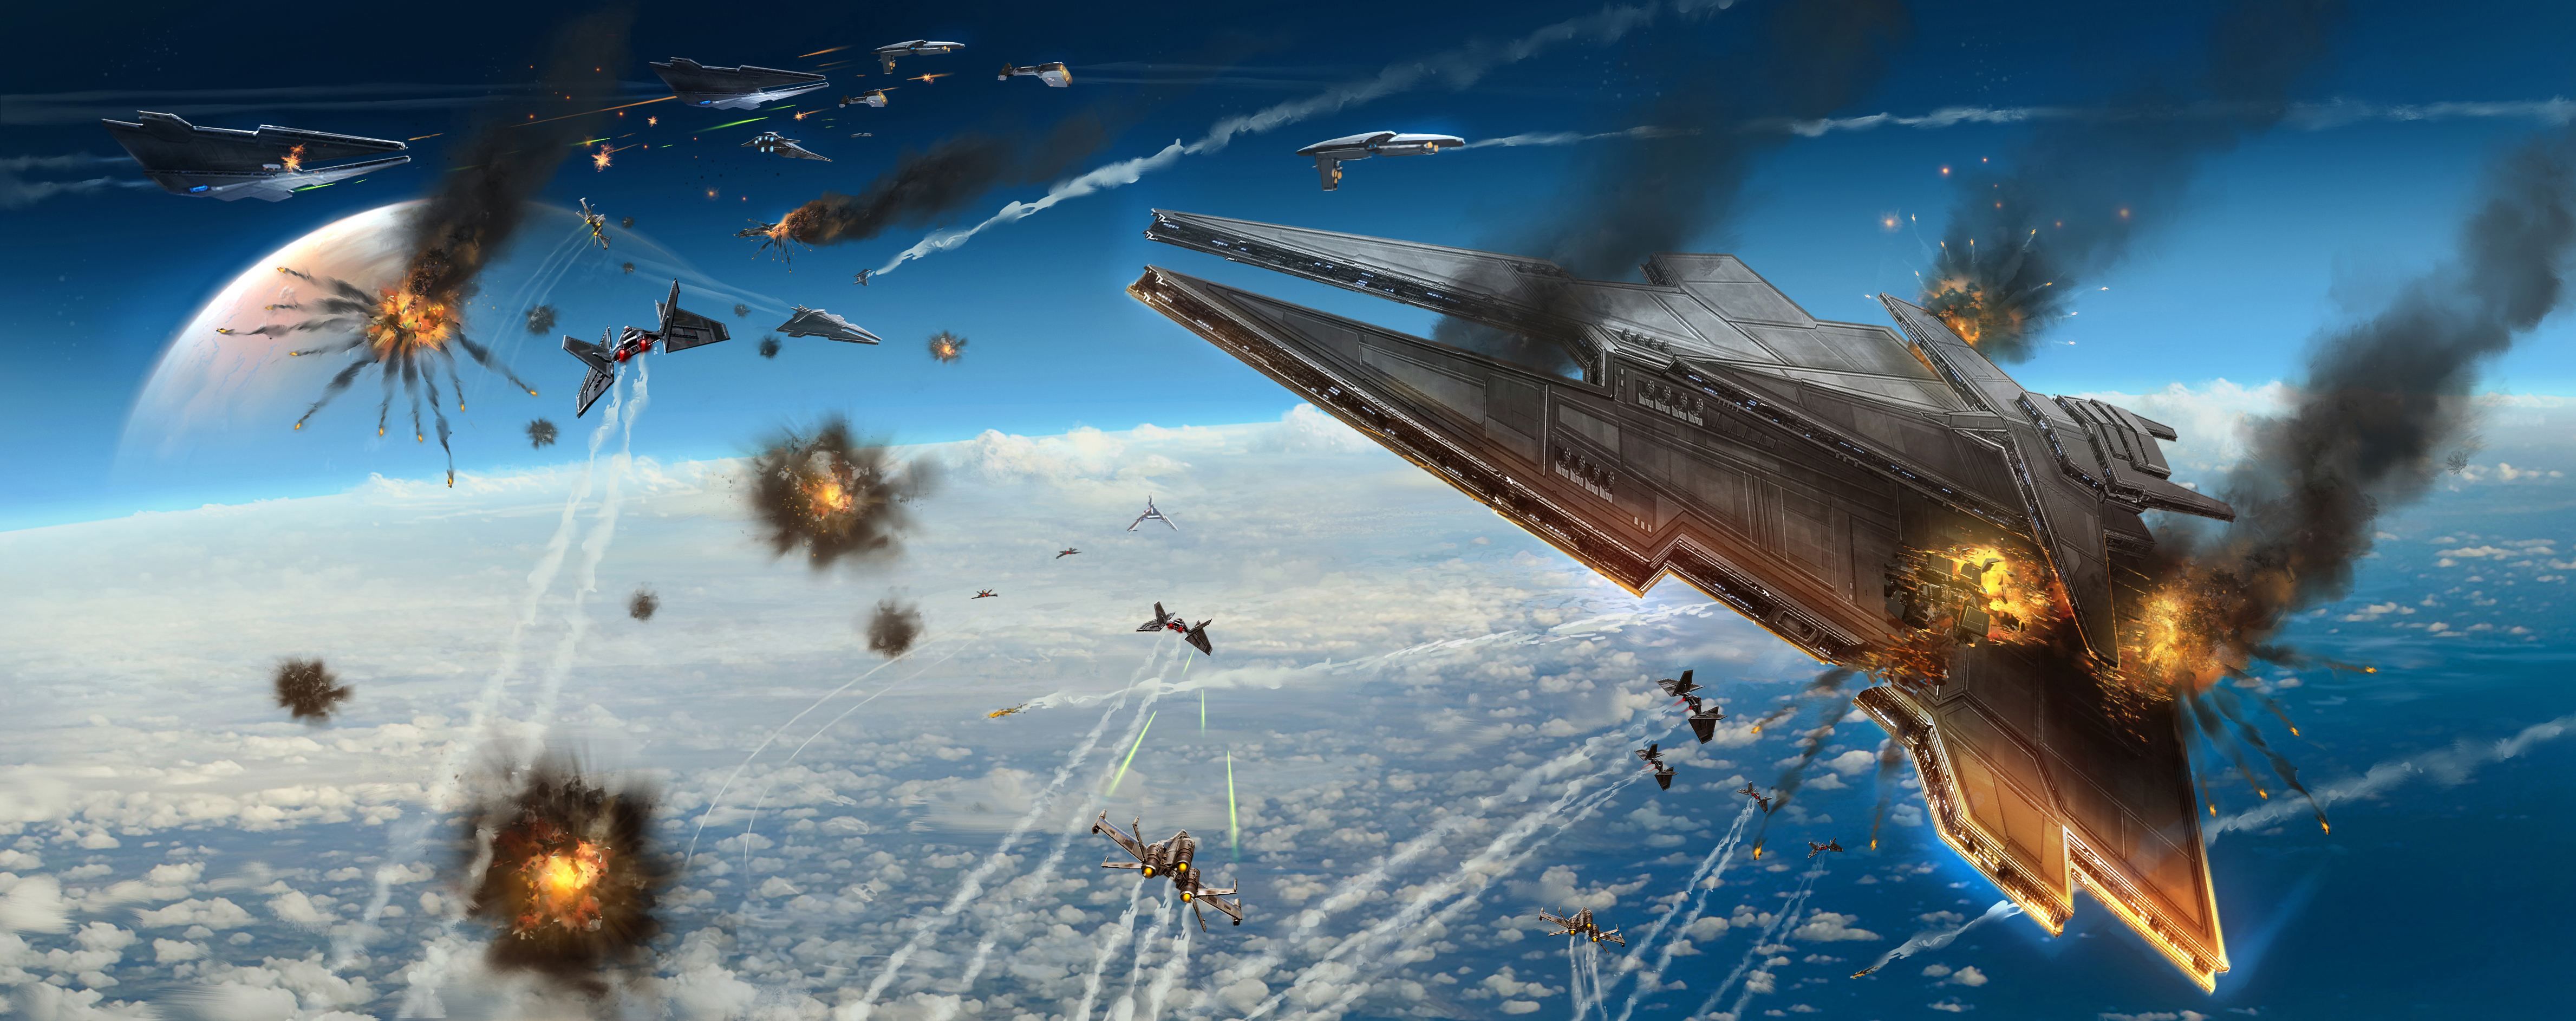 Free download Space War HD Wallpaper Aircraft Wallpaper [4757x1885] for your Desktop, Mobile & Tablet. Explore Space War Wallpaper. Civil War Wallpaper, God Of War Wallpaper, Space Wallpaper for Walls